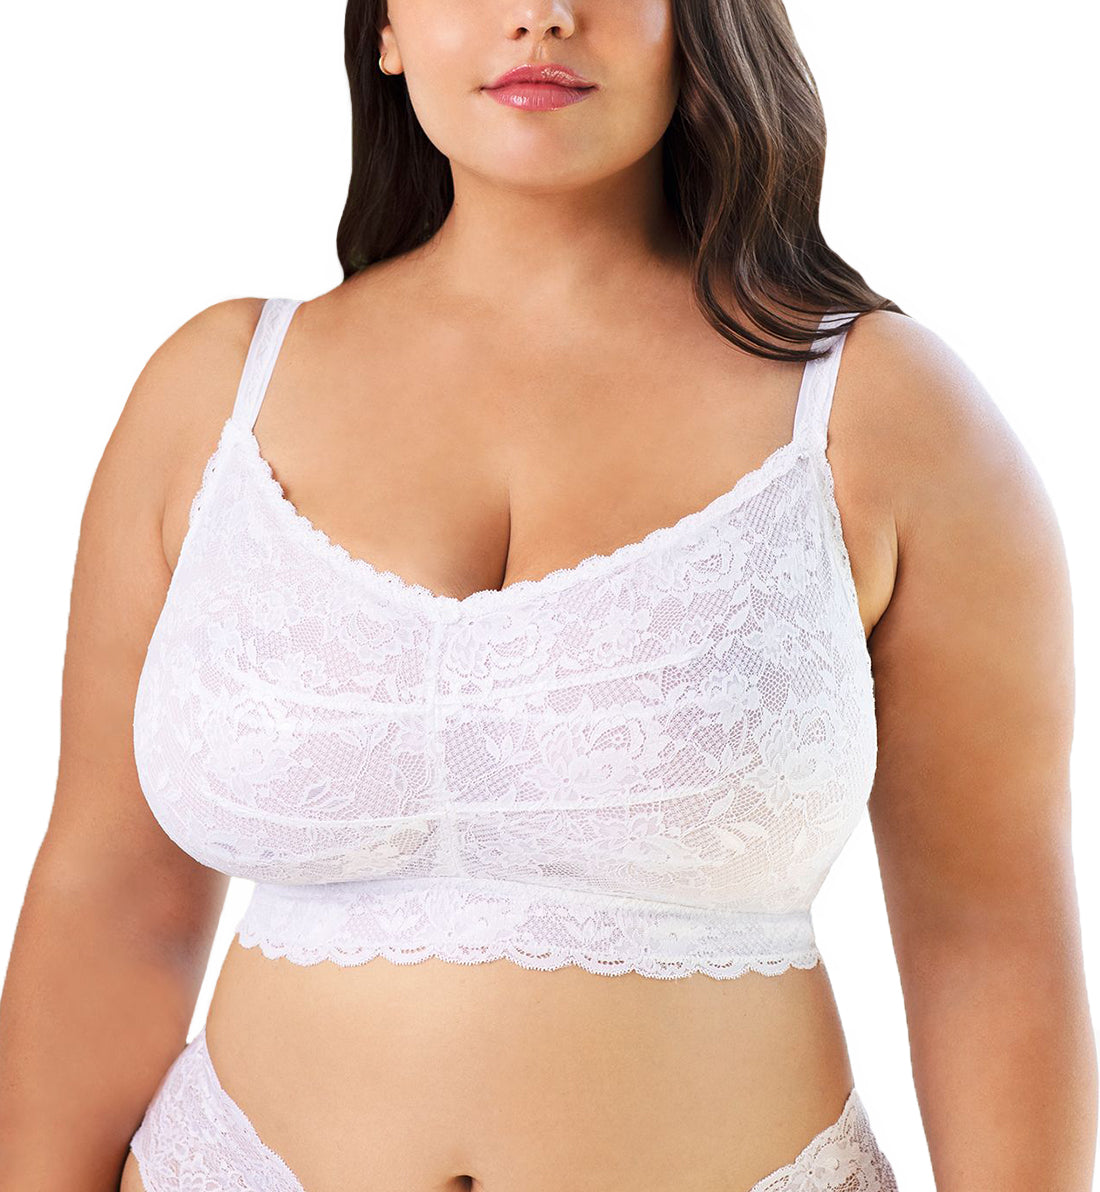 Supportive Styles for Larger Busts: Cosabella Curvy Collection